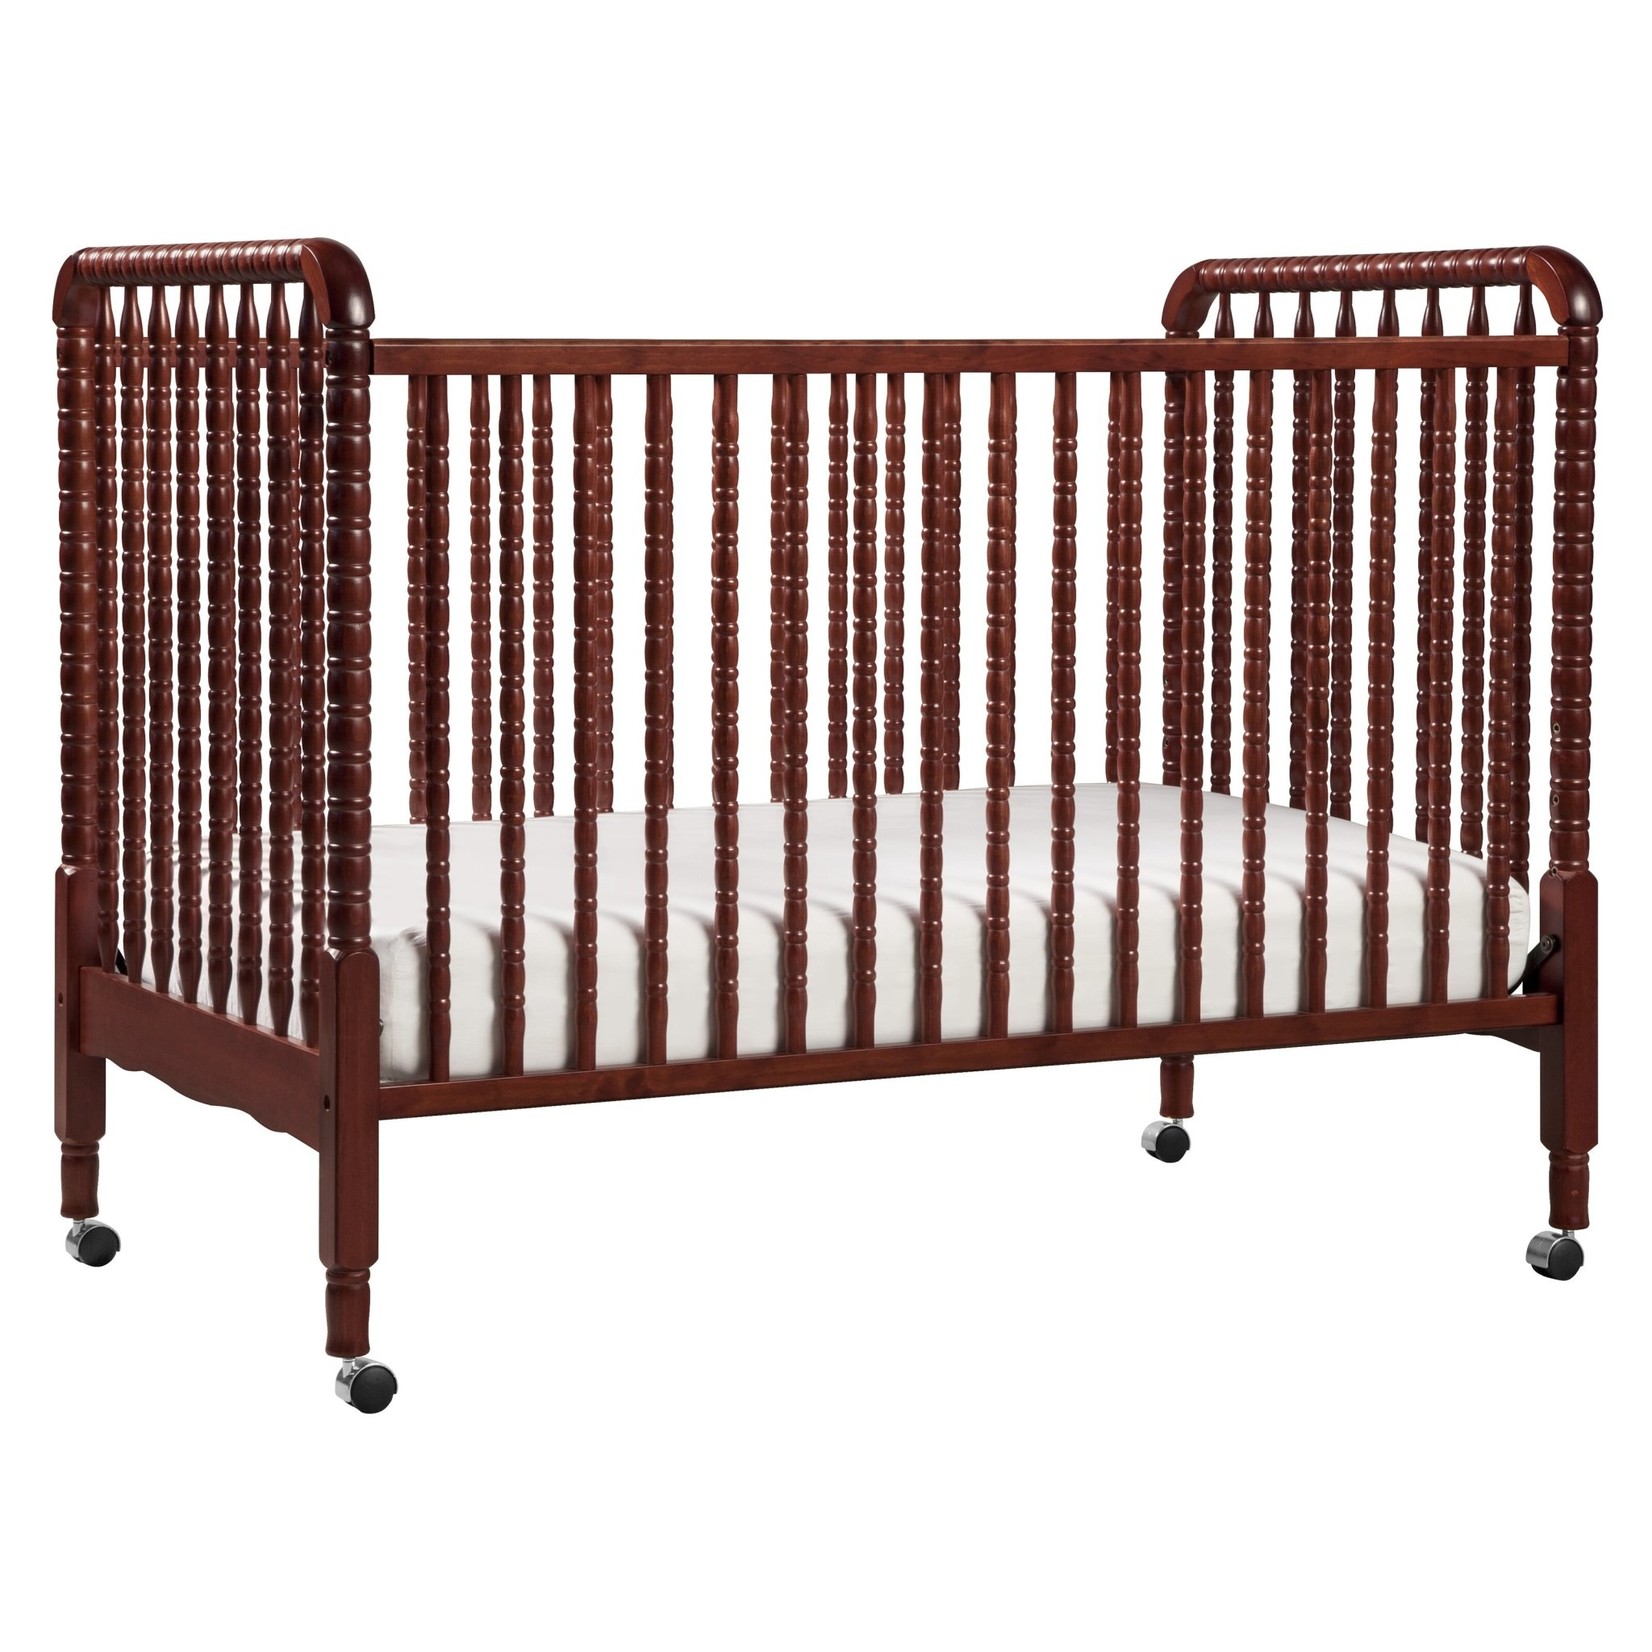 *Jenny Lind 3-in-1 Standard Convertible Portable Crib - Cherry